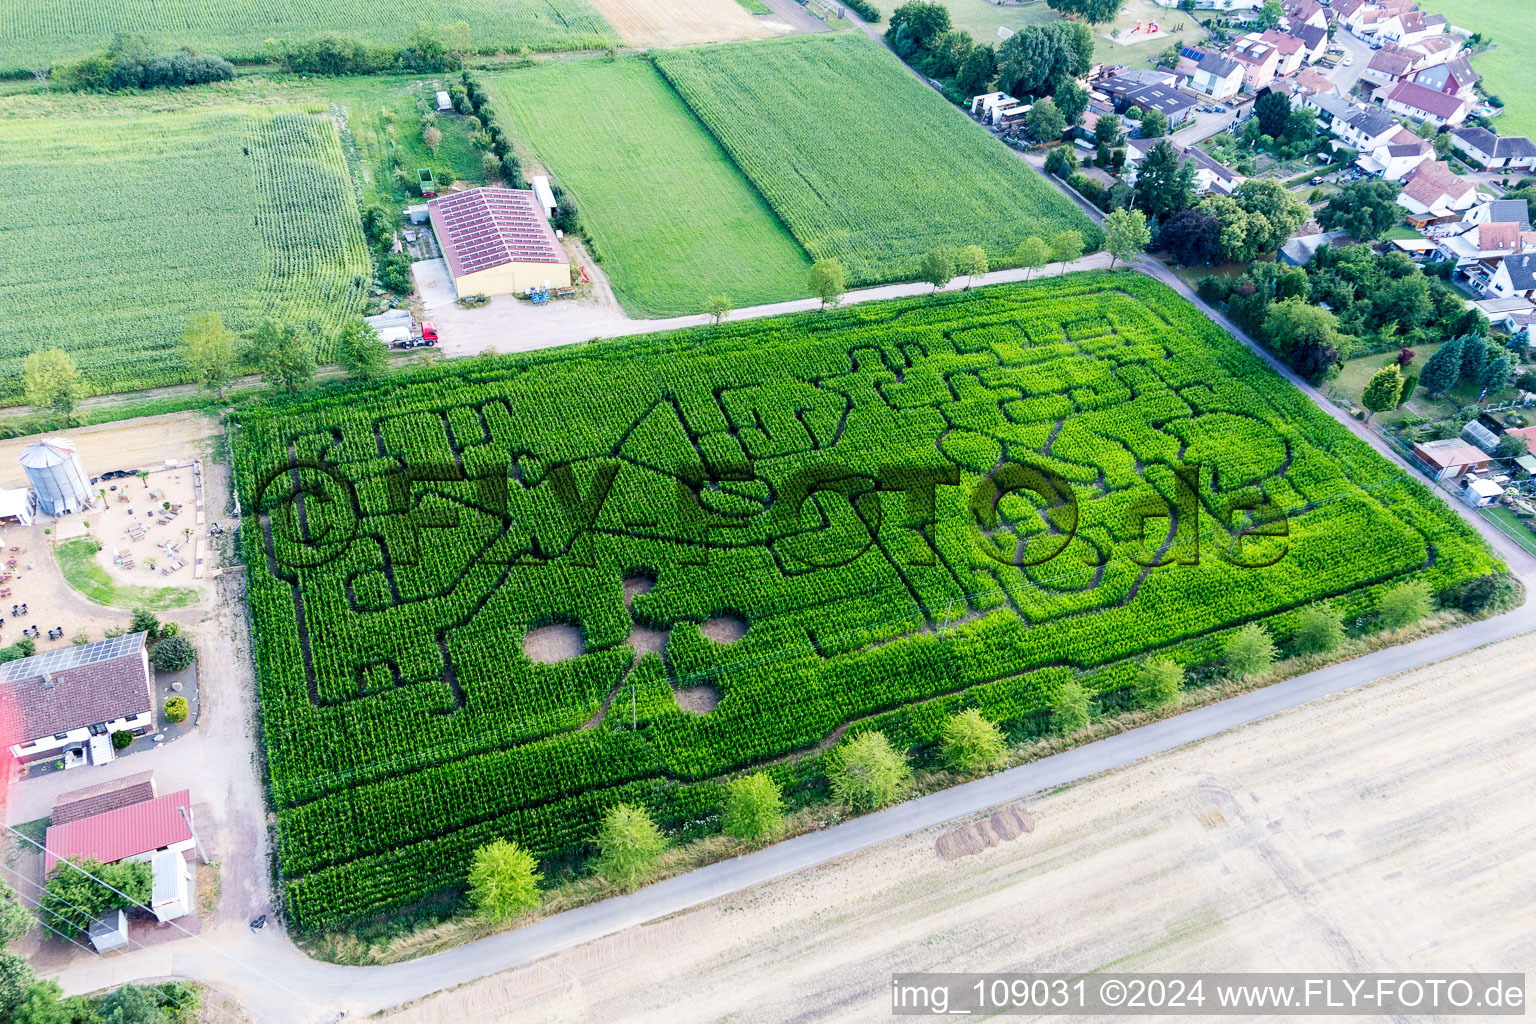 Aerial photograpy of Maze - Labyrinth on a corn-field in Steinweiler in the state Rhineland-Palatinate, Germany